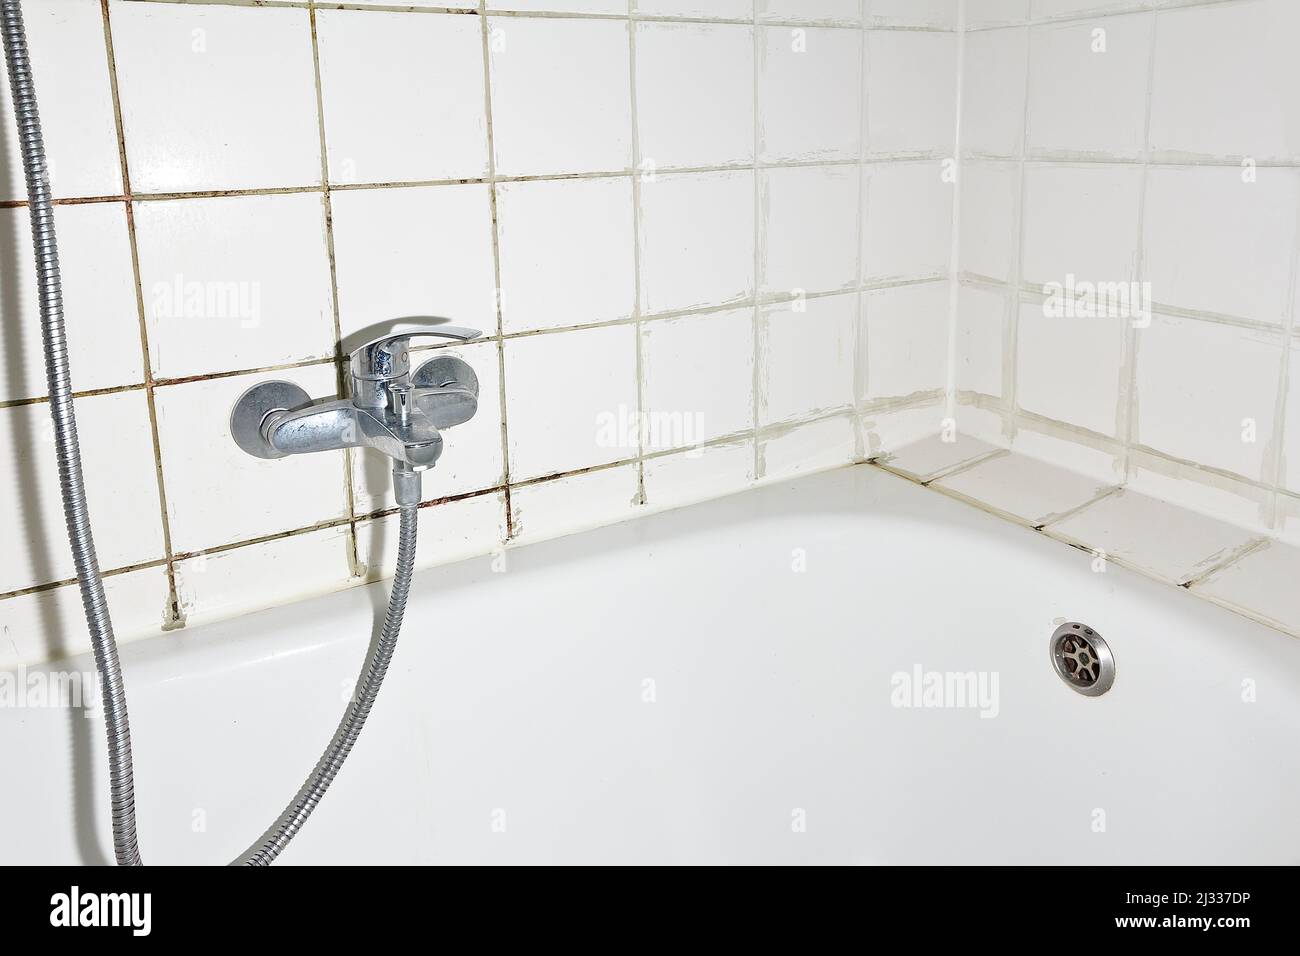 Spring cleaning concept: filthy shower armature in bath tub with black mold growing on calcifications on the tile grouting in an unclean old bathroom. Stock Photo